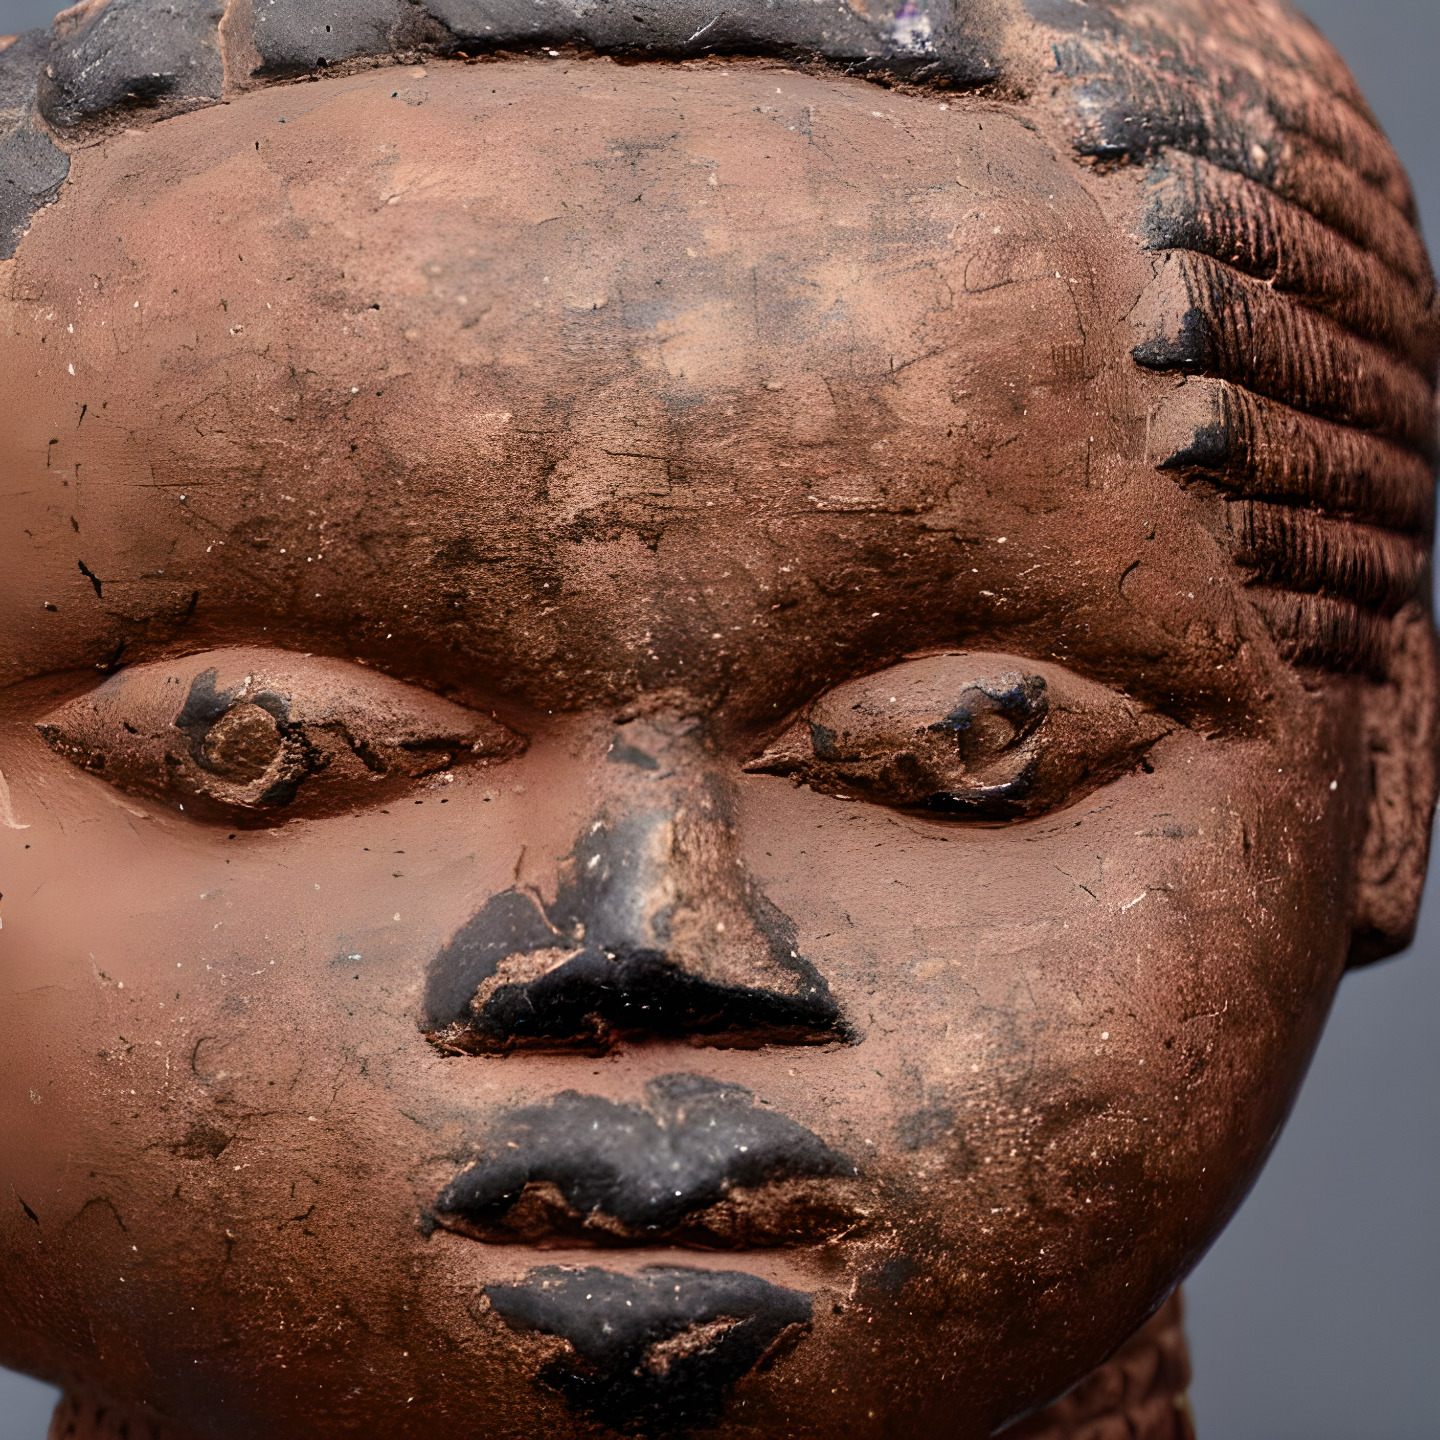 An AI-generated close up view of a sculpture showing a human face in what appears to be a terracotta material. The sculpture appears to be weathered a grayish brown color in patches.